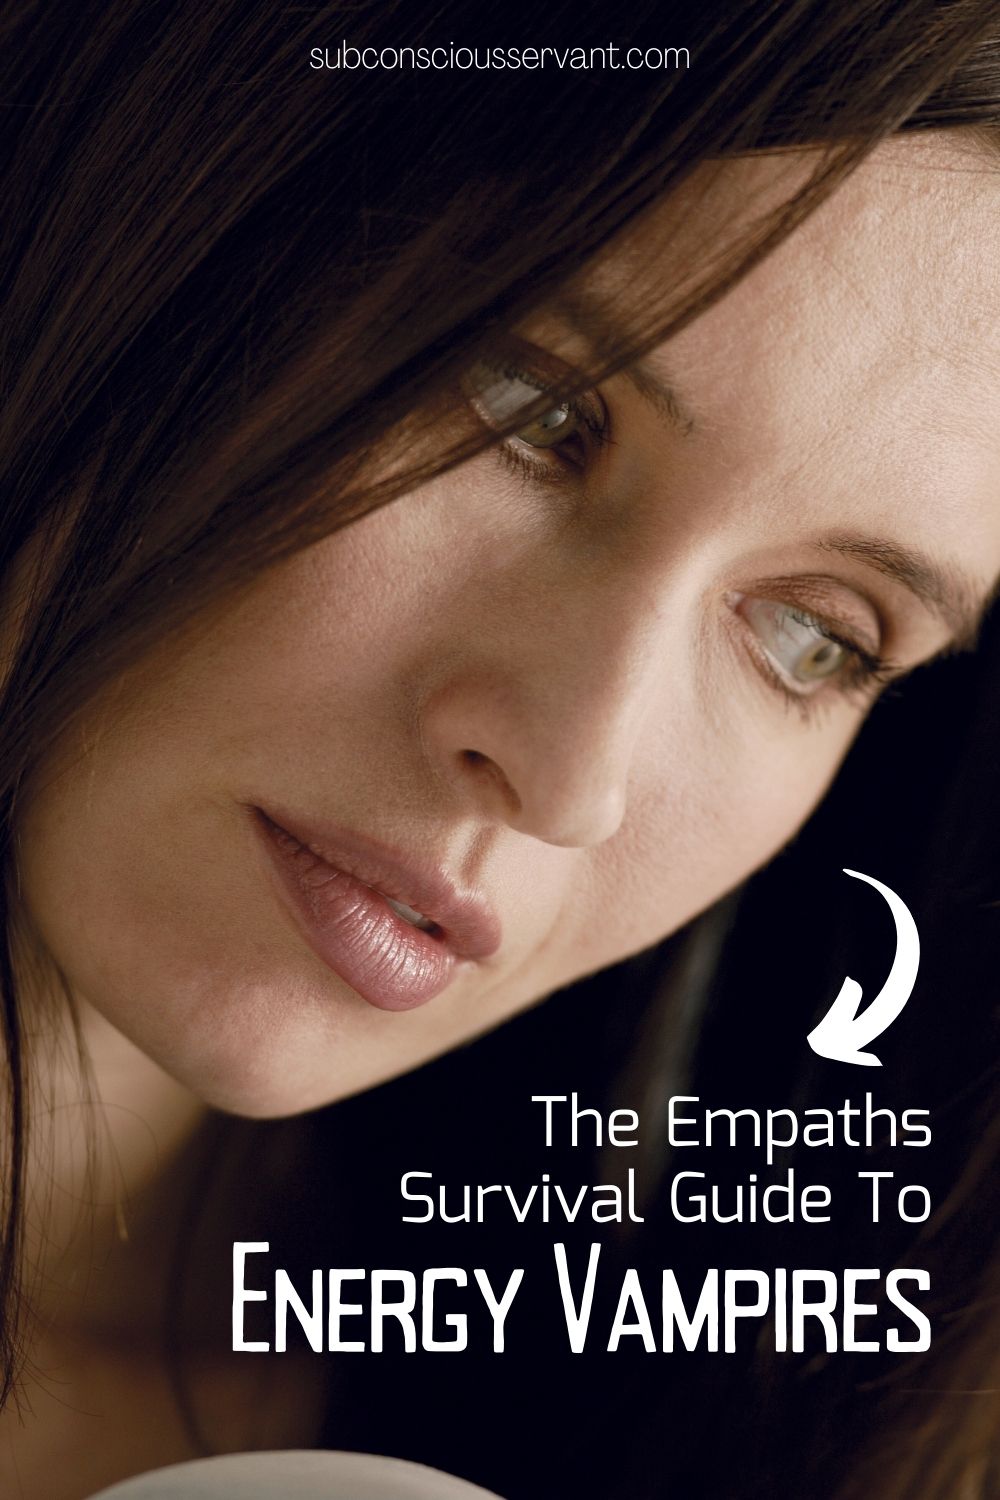 The Empaths Survival Guide To Energy Vampires